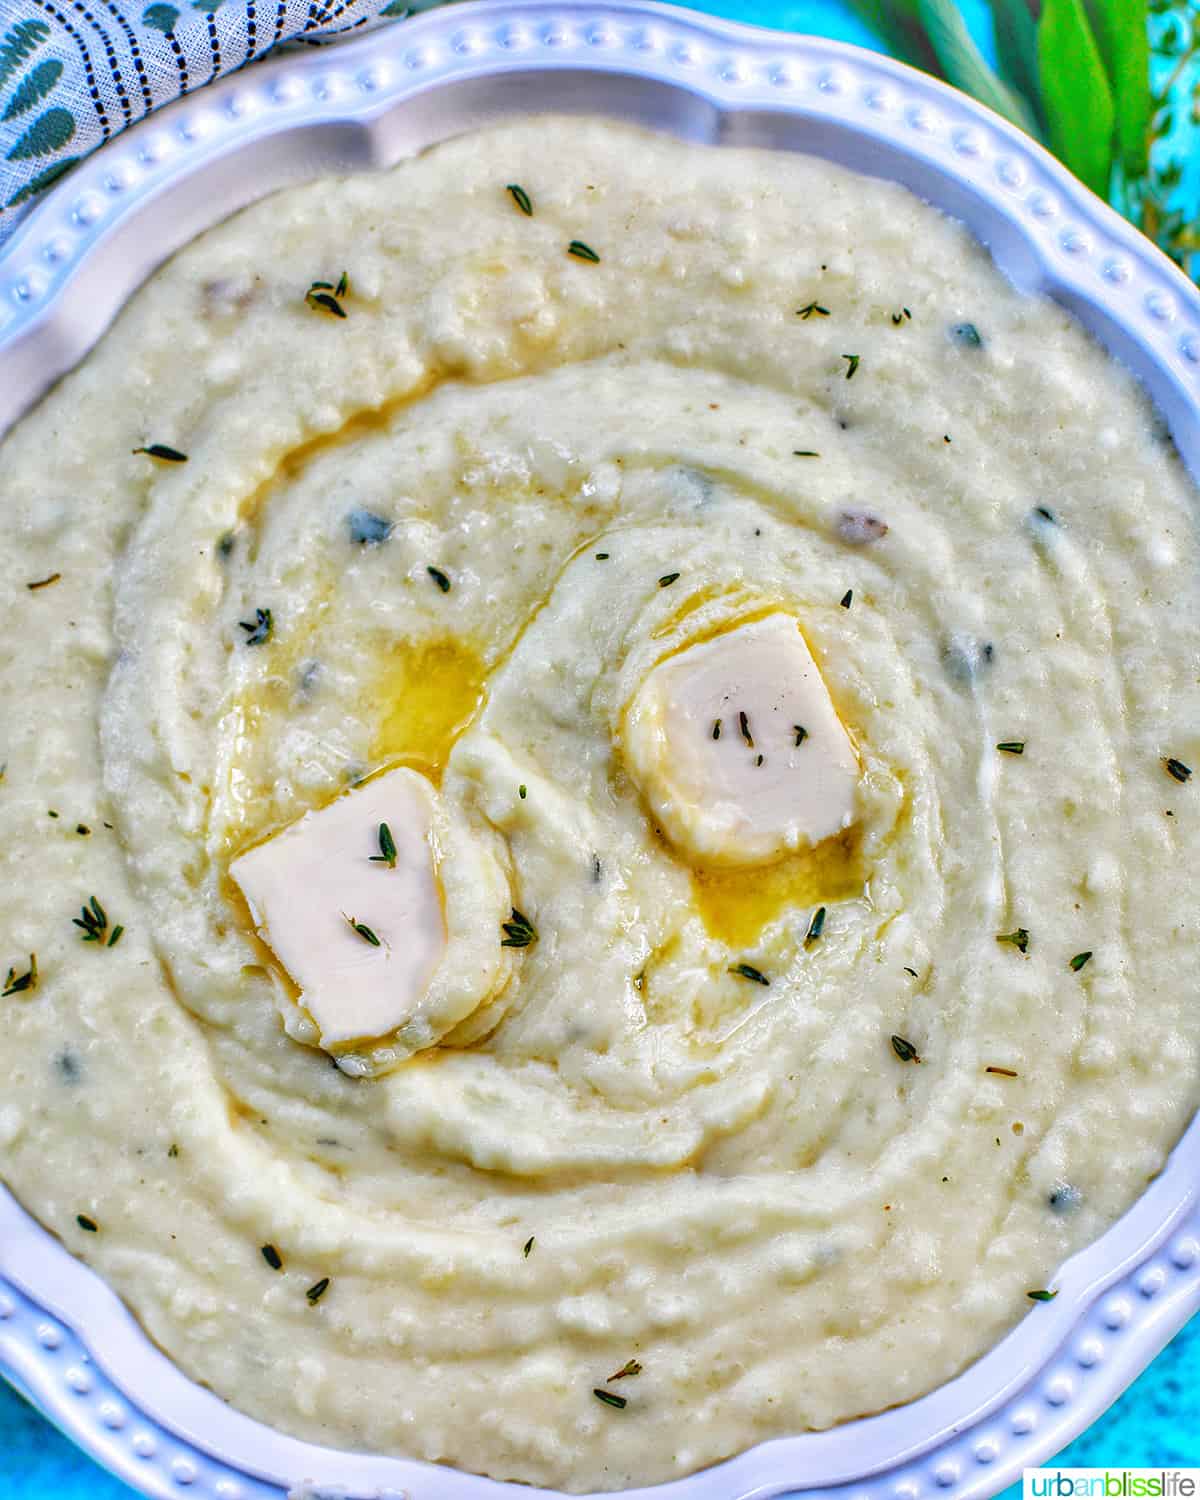 Instant Pot Garlic Mashed Potatoes in a bowl with pats of melting butter and herbs.